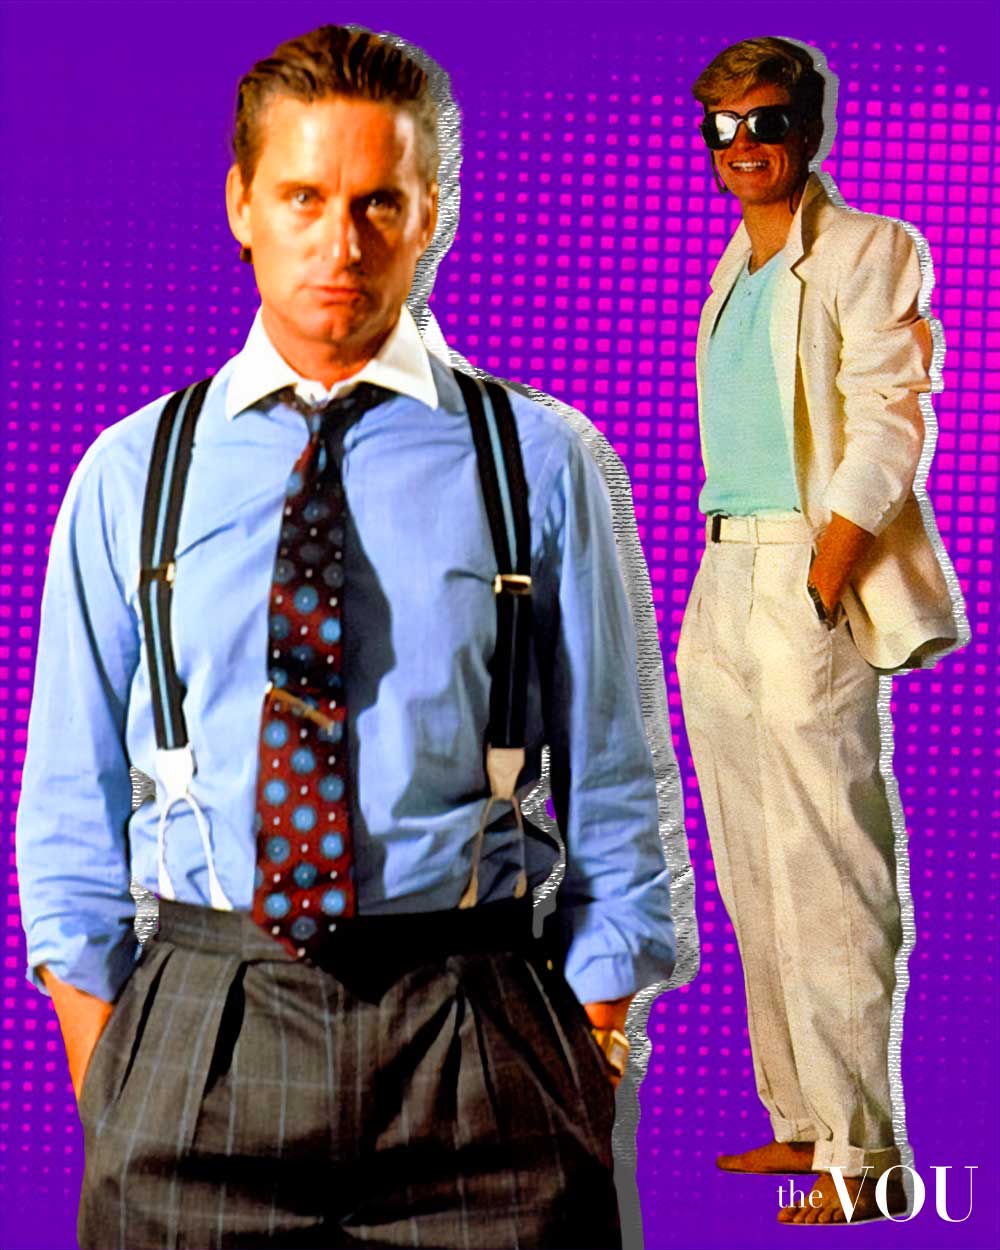 80s Men Fashion: 11 Iconic Styles You Can Rock Today